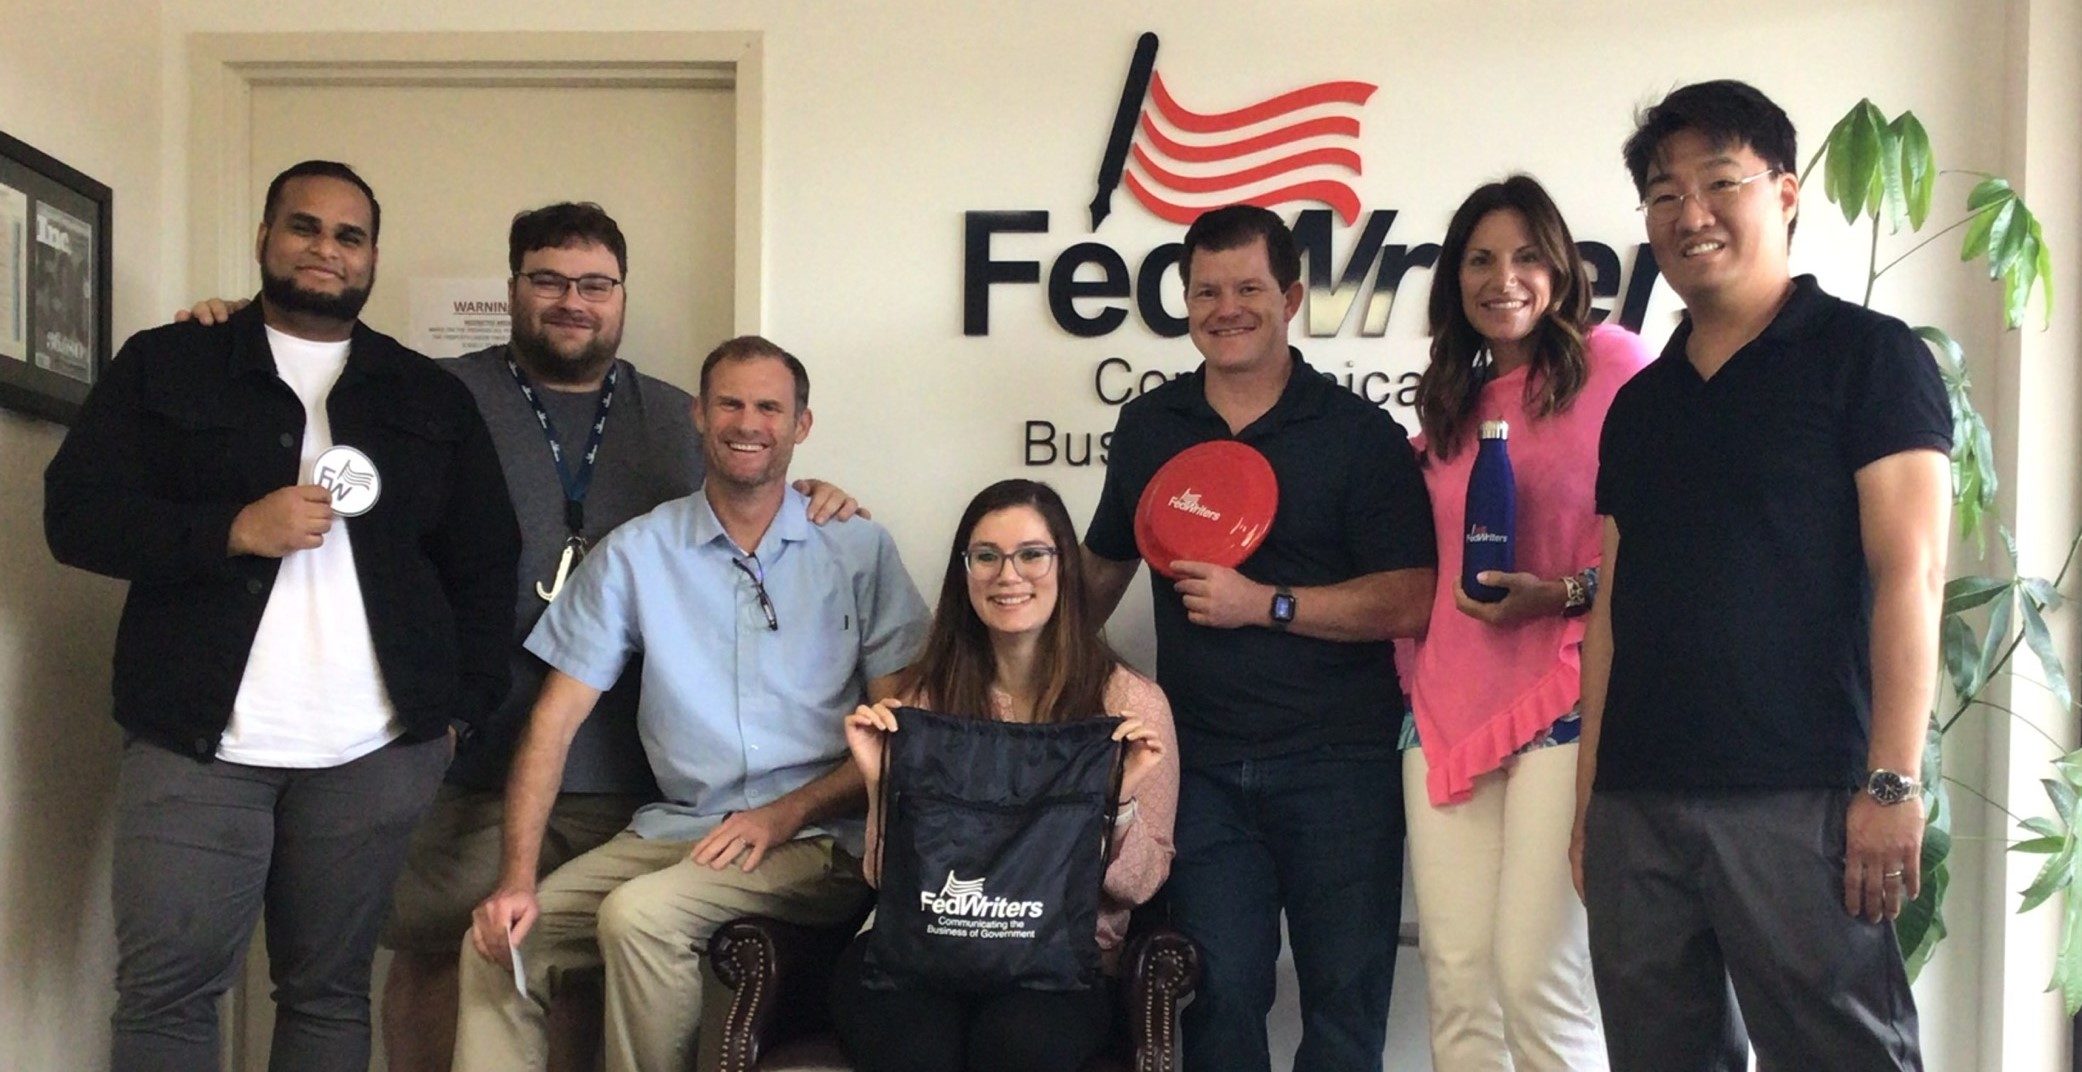 Subhaga Weerasinghe, Marc Fain, Eric Stone, Abigail Casas, Anthony Stong, Maryanne Vaughn, and Mitchell Cho posing in the FedWriters lobby holding some swag.